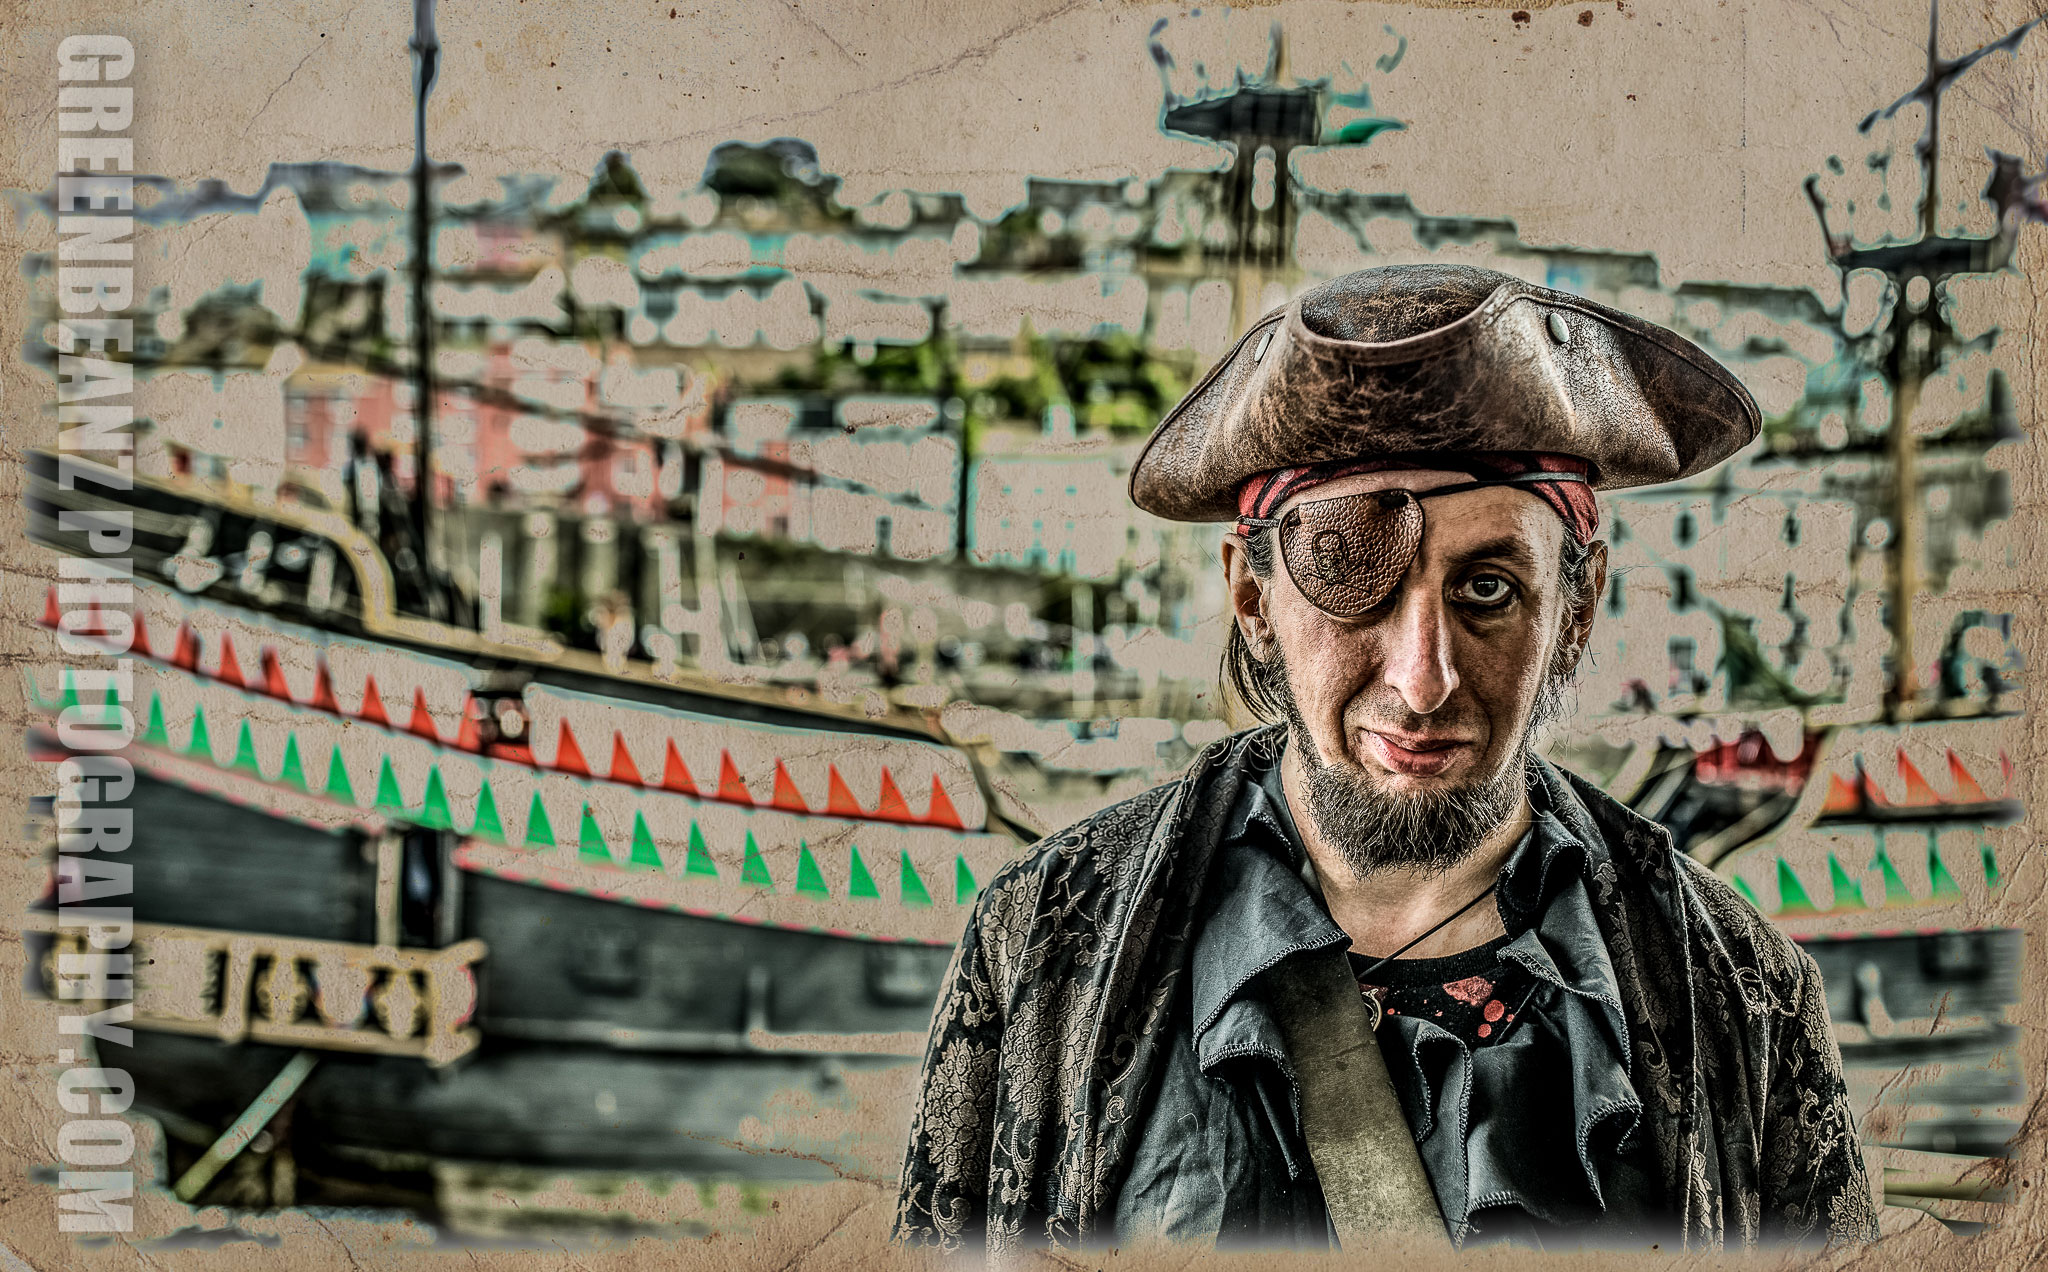 Richard Sandford as a Pirate on the final day of Brixahm Pirate Festival 2019